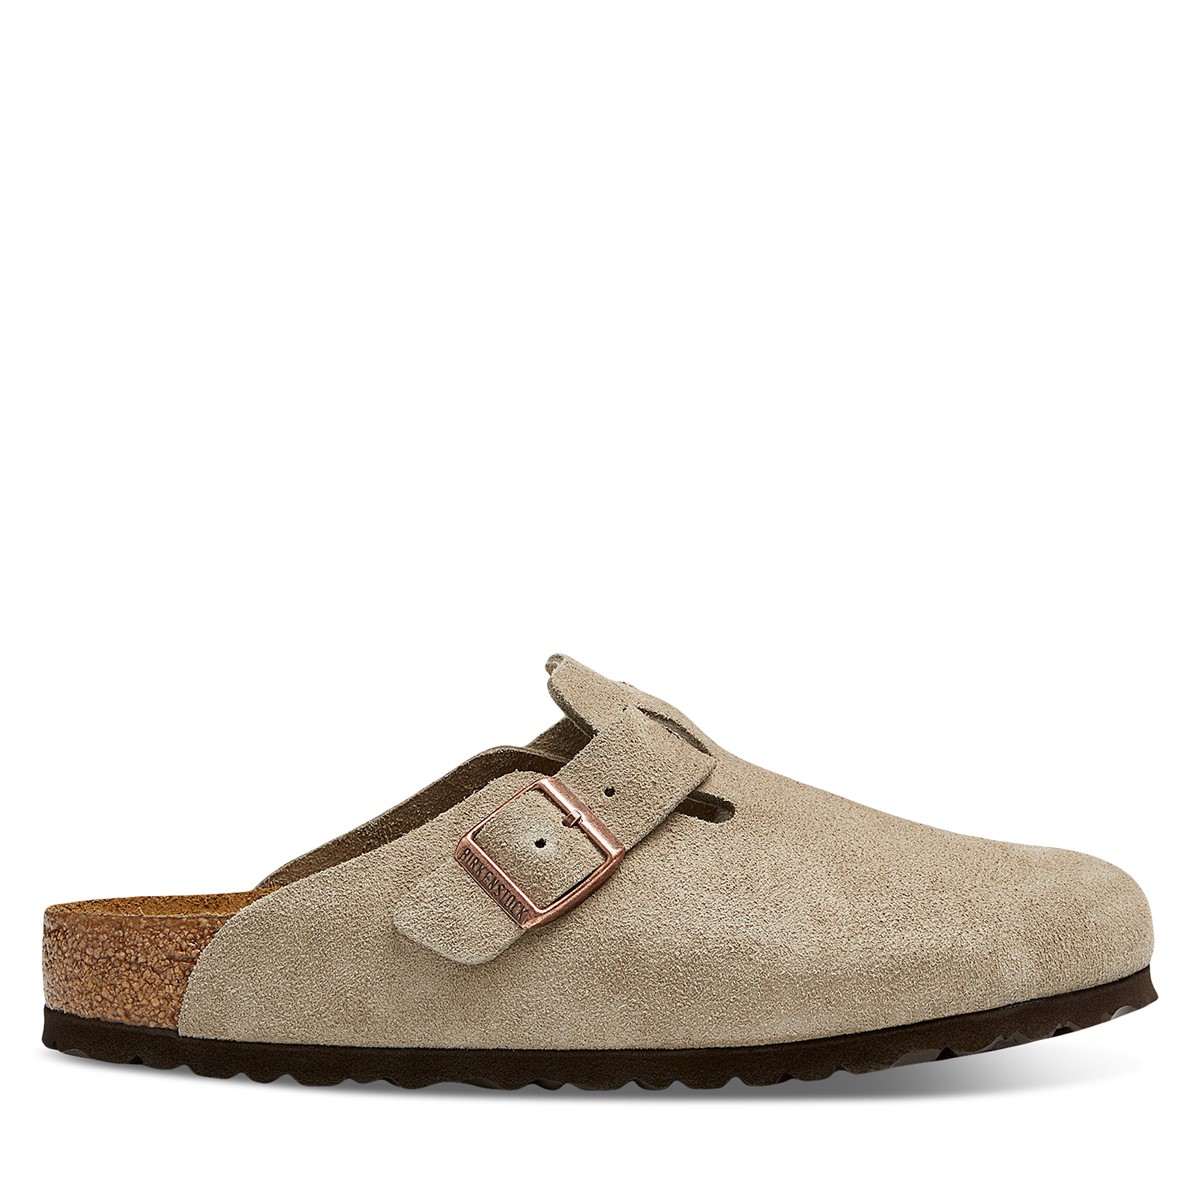 Men's Boston Soft Footbed Clogs in Taupe